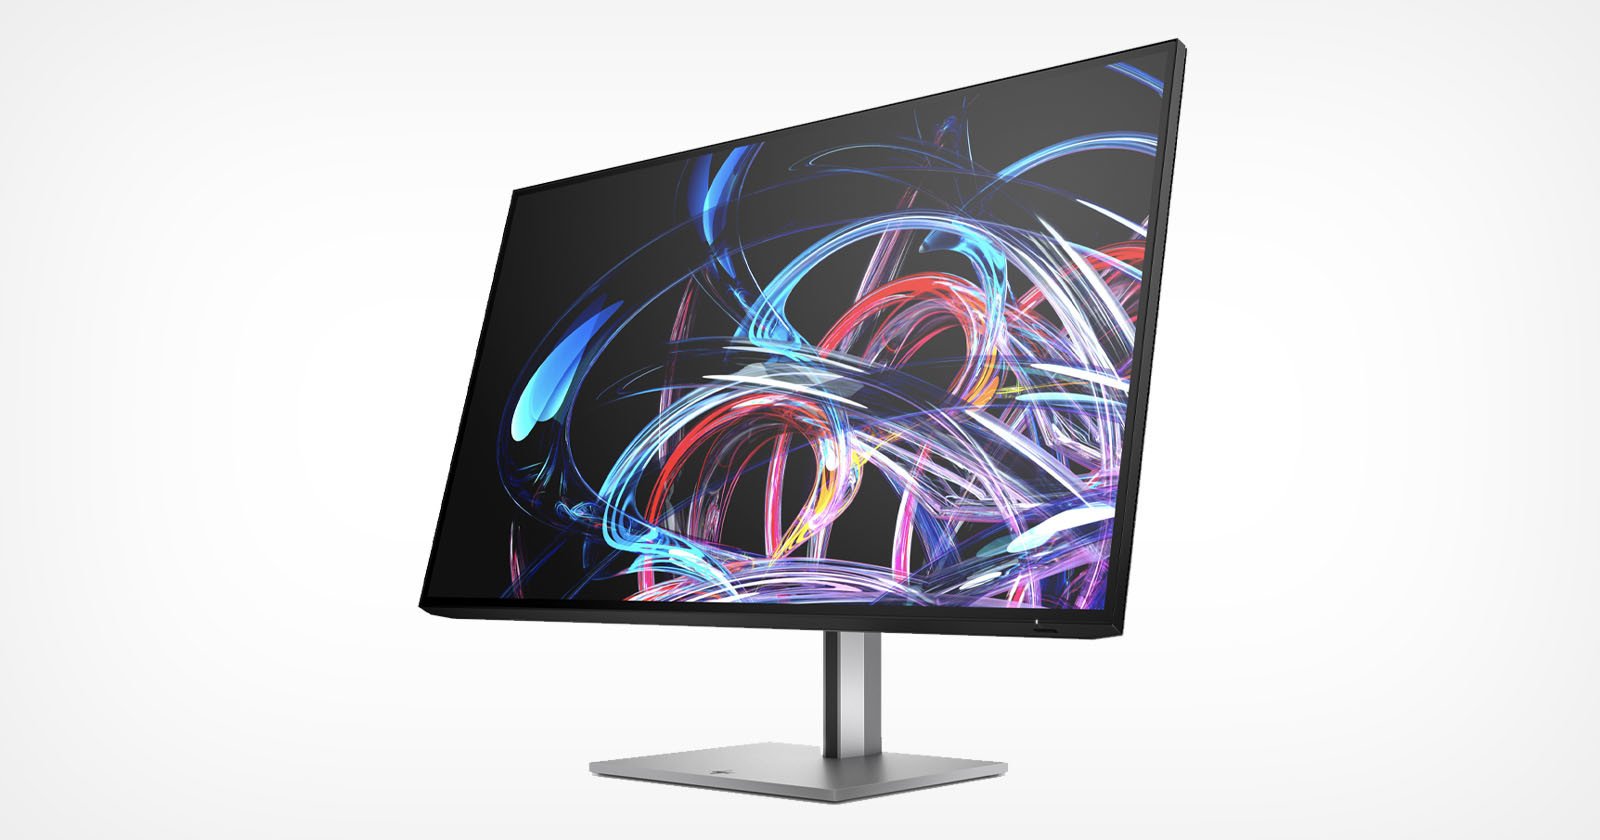  z32k thunderbolt 4-equipped color-accurate monitor 